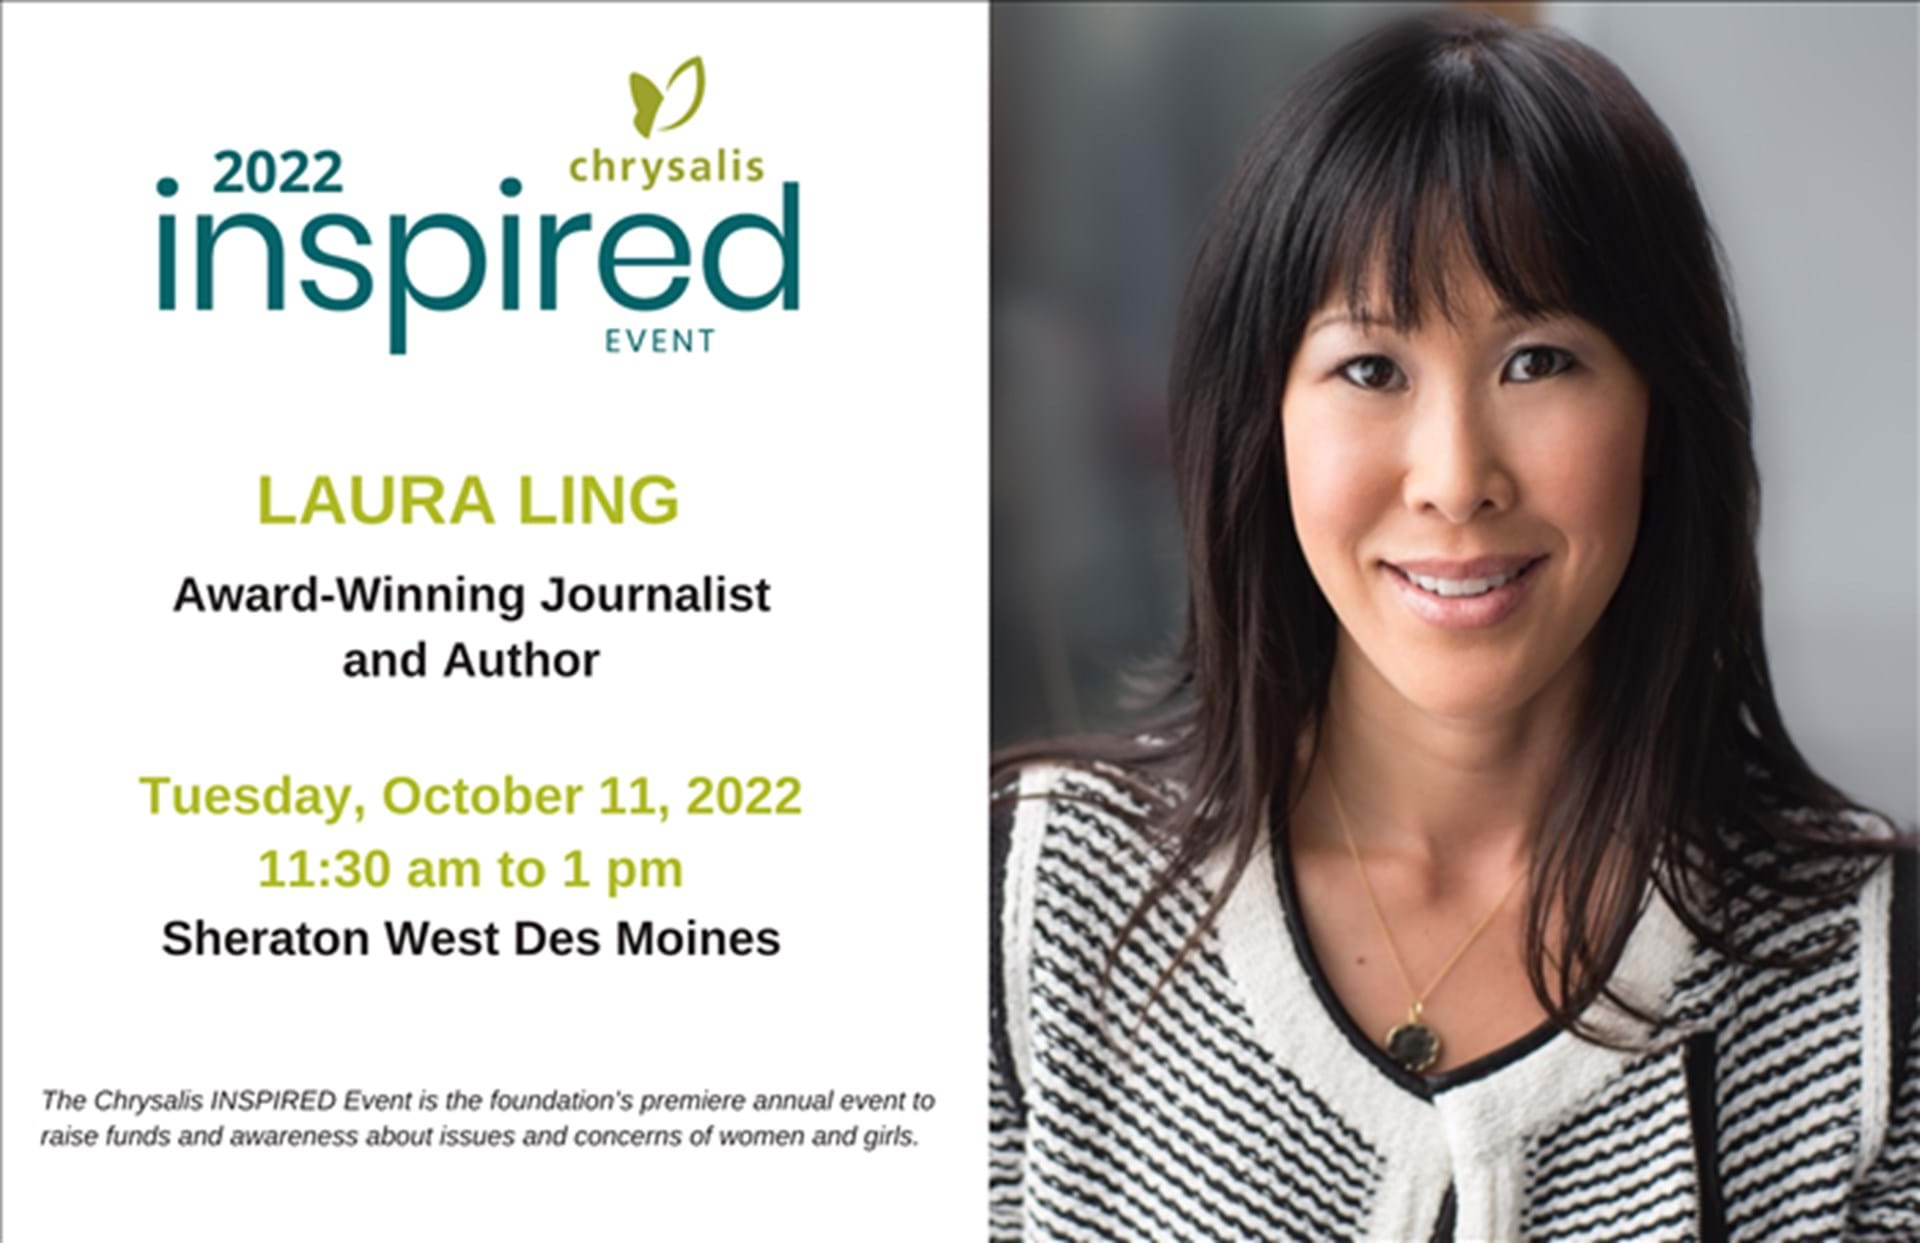 Chrysalis INSPIRED Event featuring Laura Ling, West Des Moines, Iowa